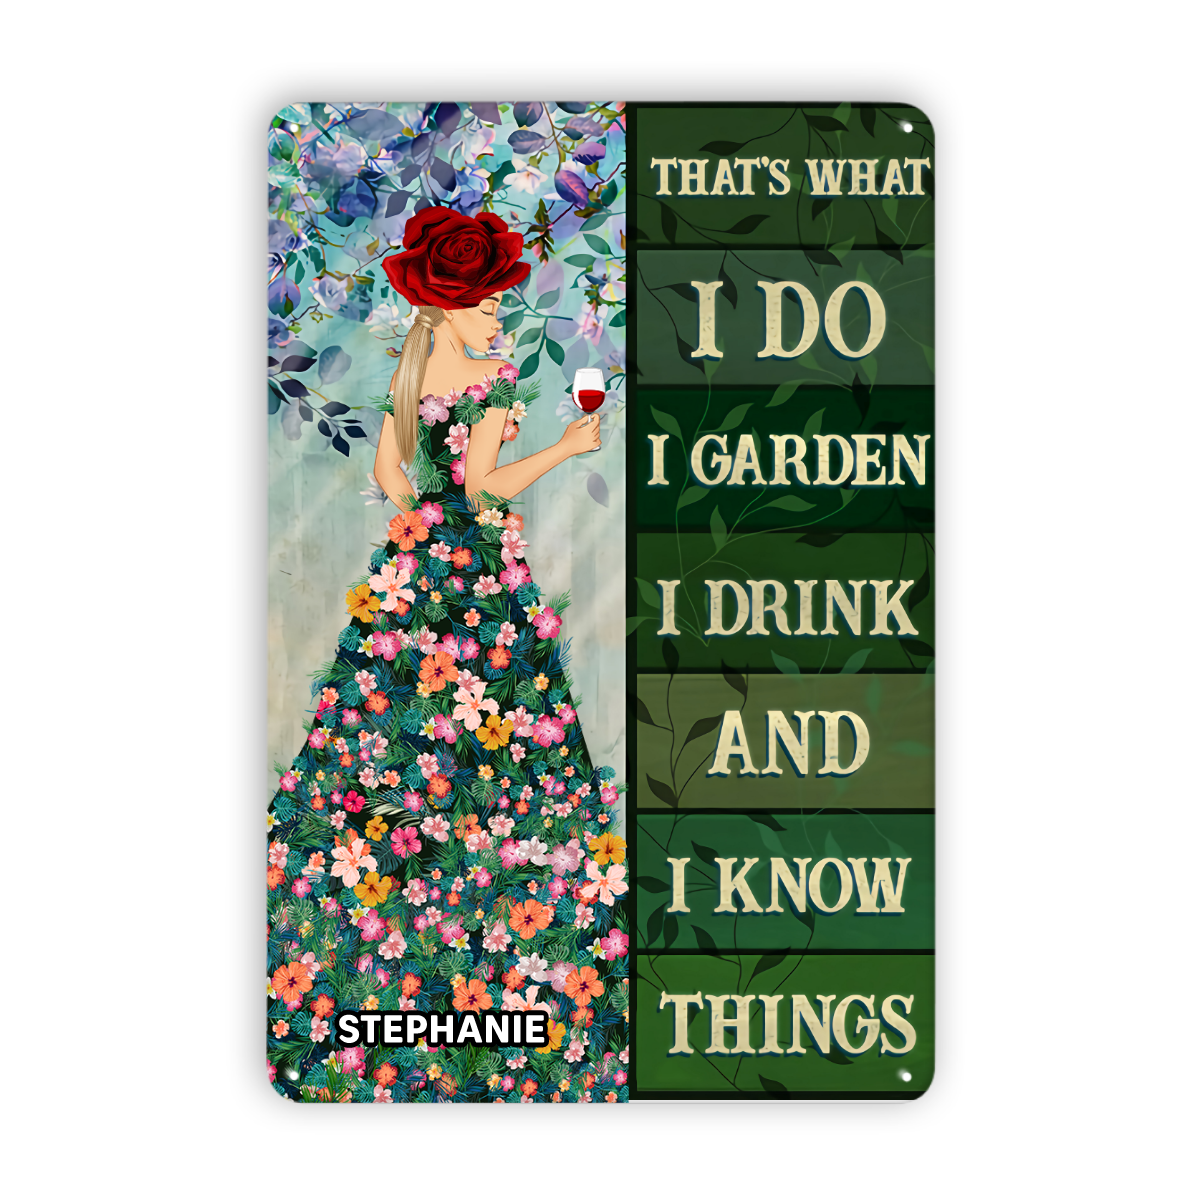 I Garden I Drink - Gift For Gardening - Personalized Metal Signs